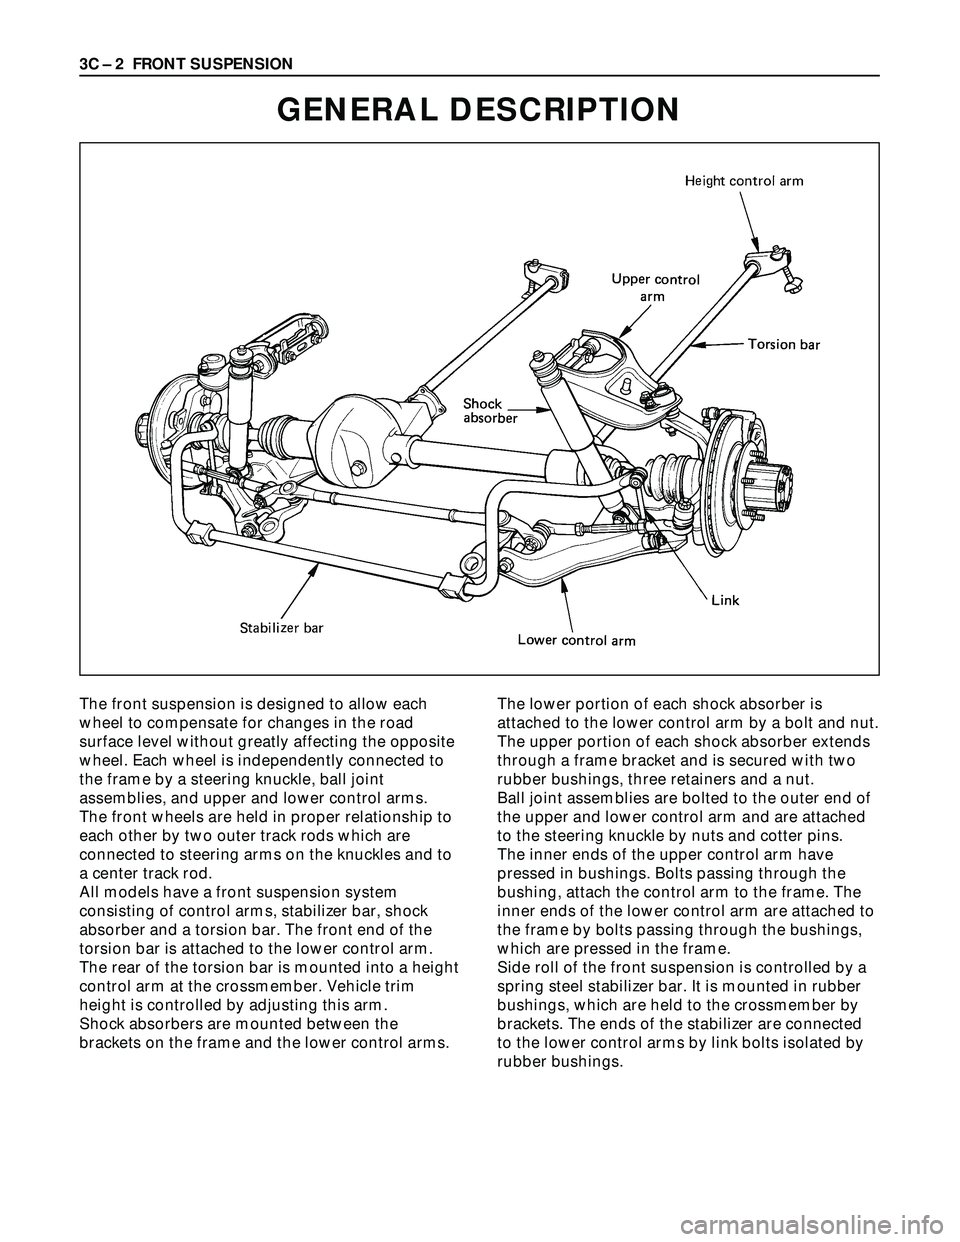 ISUZU TROOPER 1998  Service Repair Manual 3C – 2 FRONT SUSPENSION
GENERAL DESCRIPTION
The front suspension is designed to allow each
wheel to compensate for changes in the road
surface level without greatly affecting the opposite
wheel. Eac